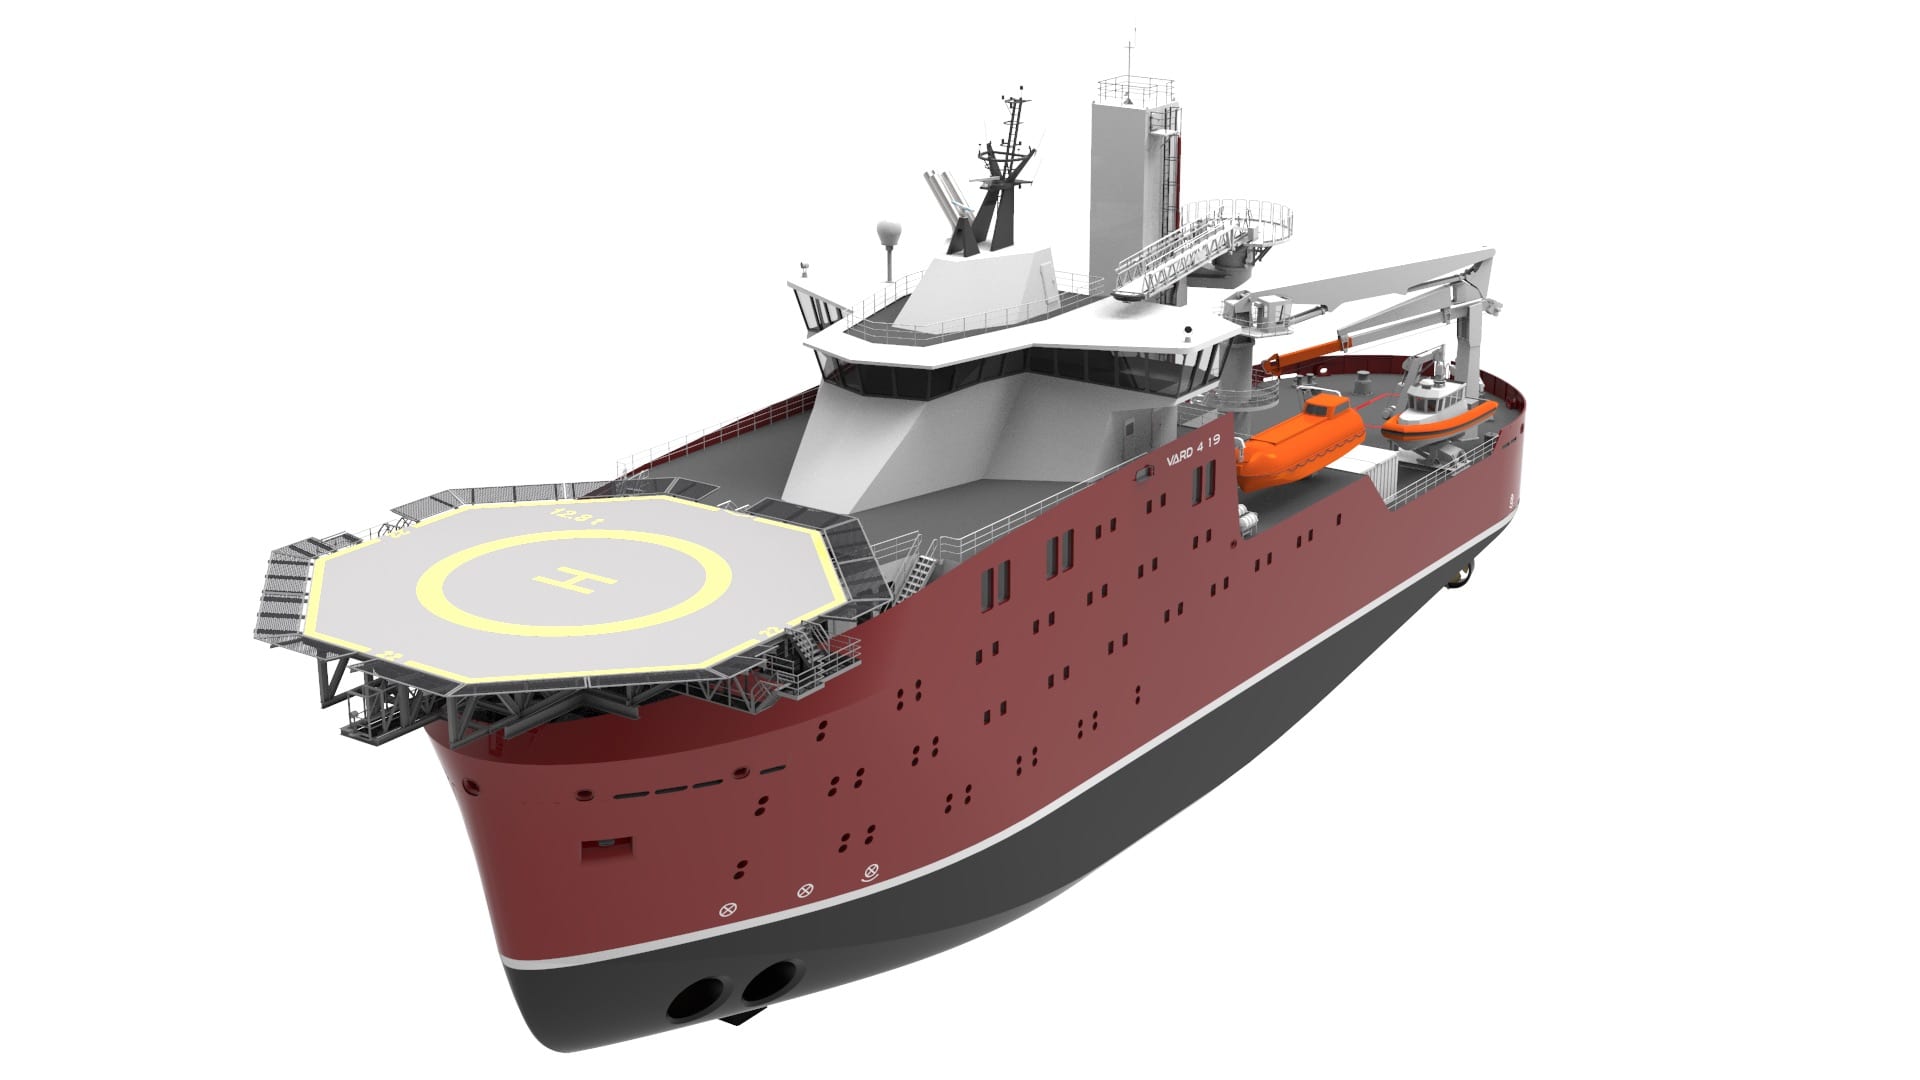 VARD Secures Second ABS Approval for Jones Act-Compliant Offshore Wind Service Vessel